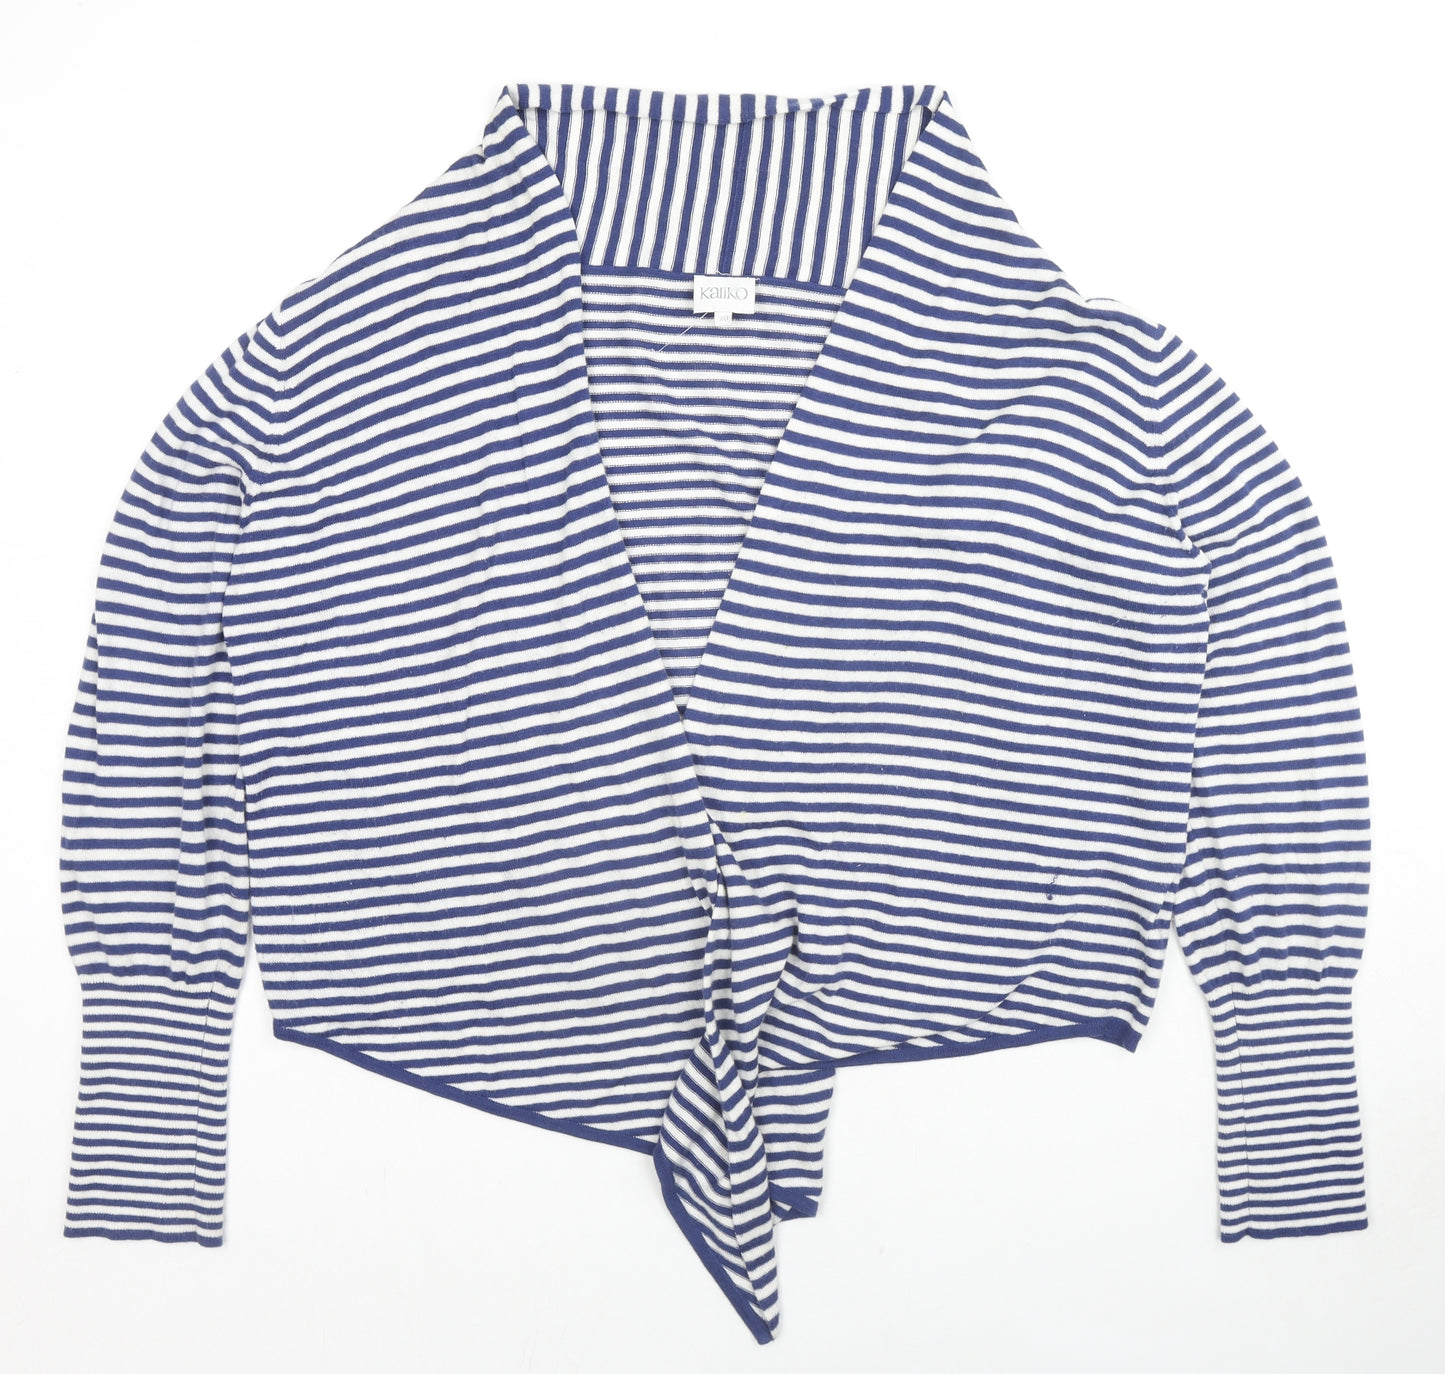 Kaliko Womens Blue V-Neck Striped Cotton Cardigan Jumper Size 20 - Waterfall Front